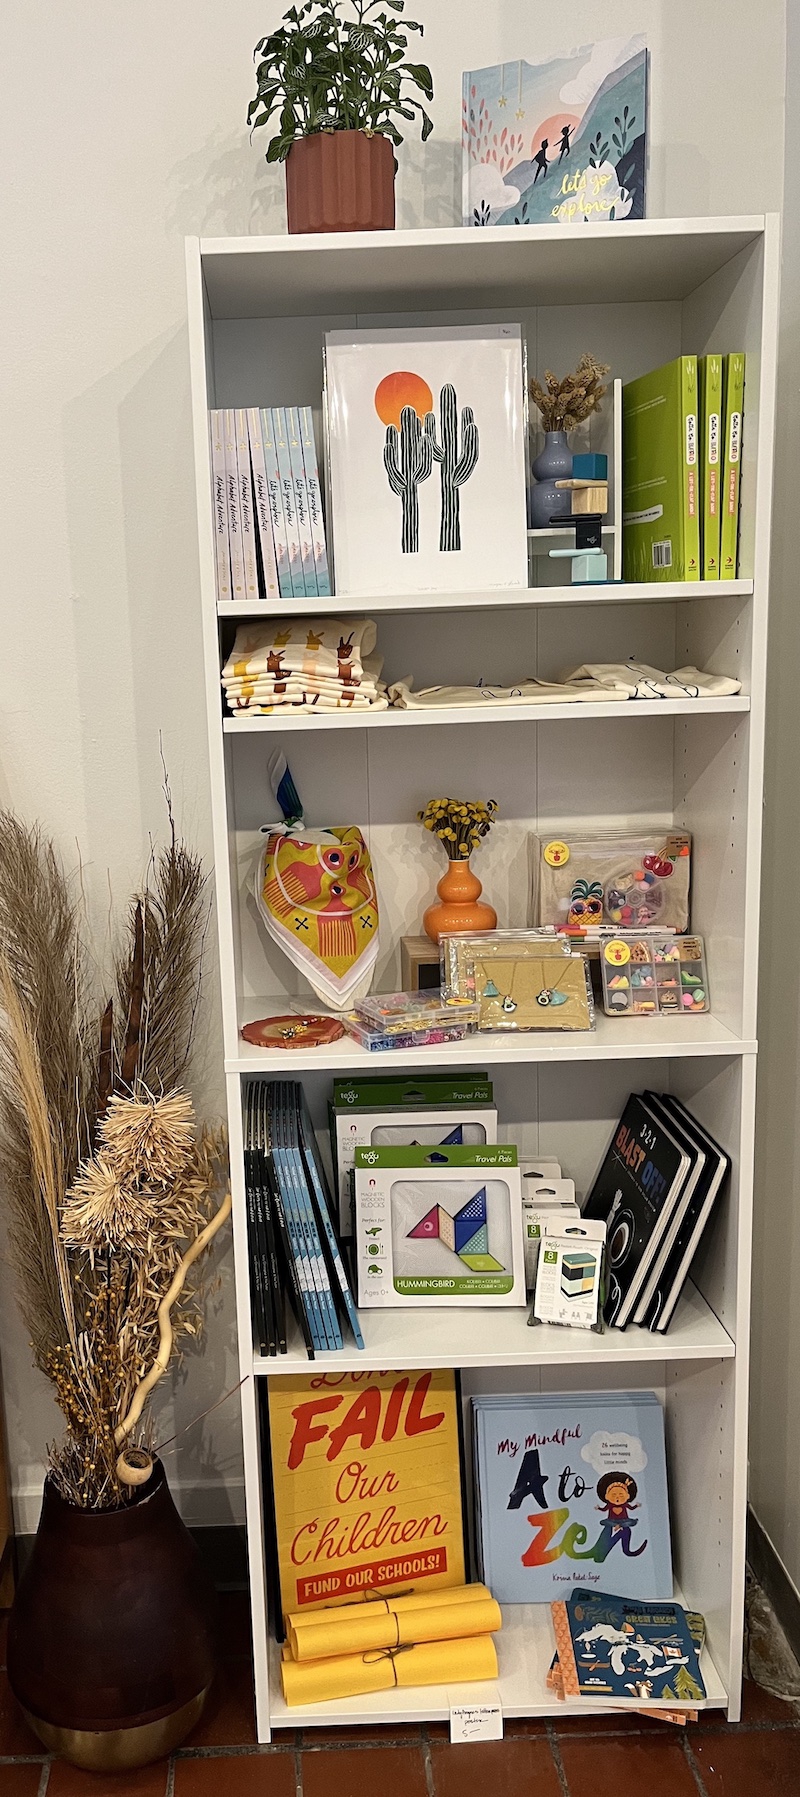 A tall white shelving unit displaying children's items: books, folded clothing, jewelry, and games. A potted plant sits on top. Photo by Dani Nutting. 